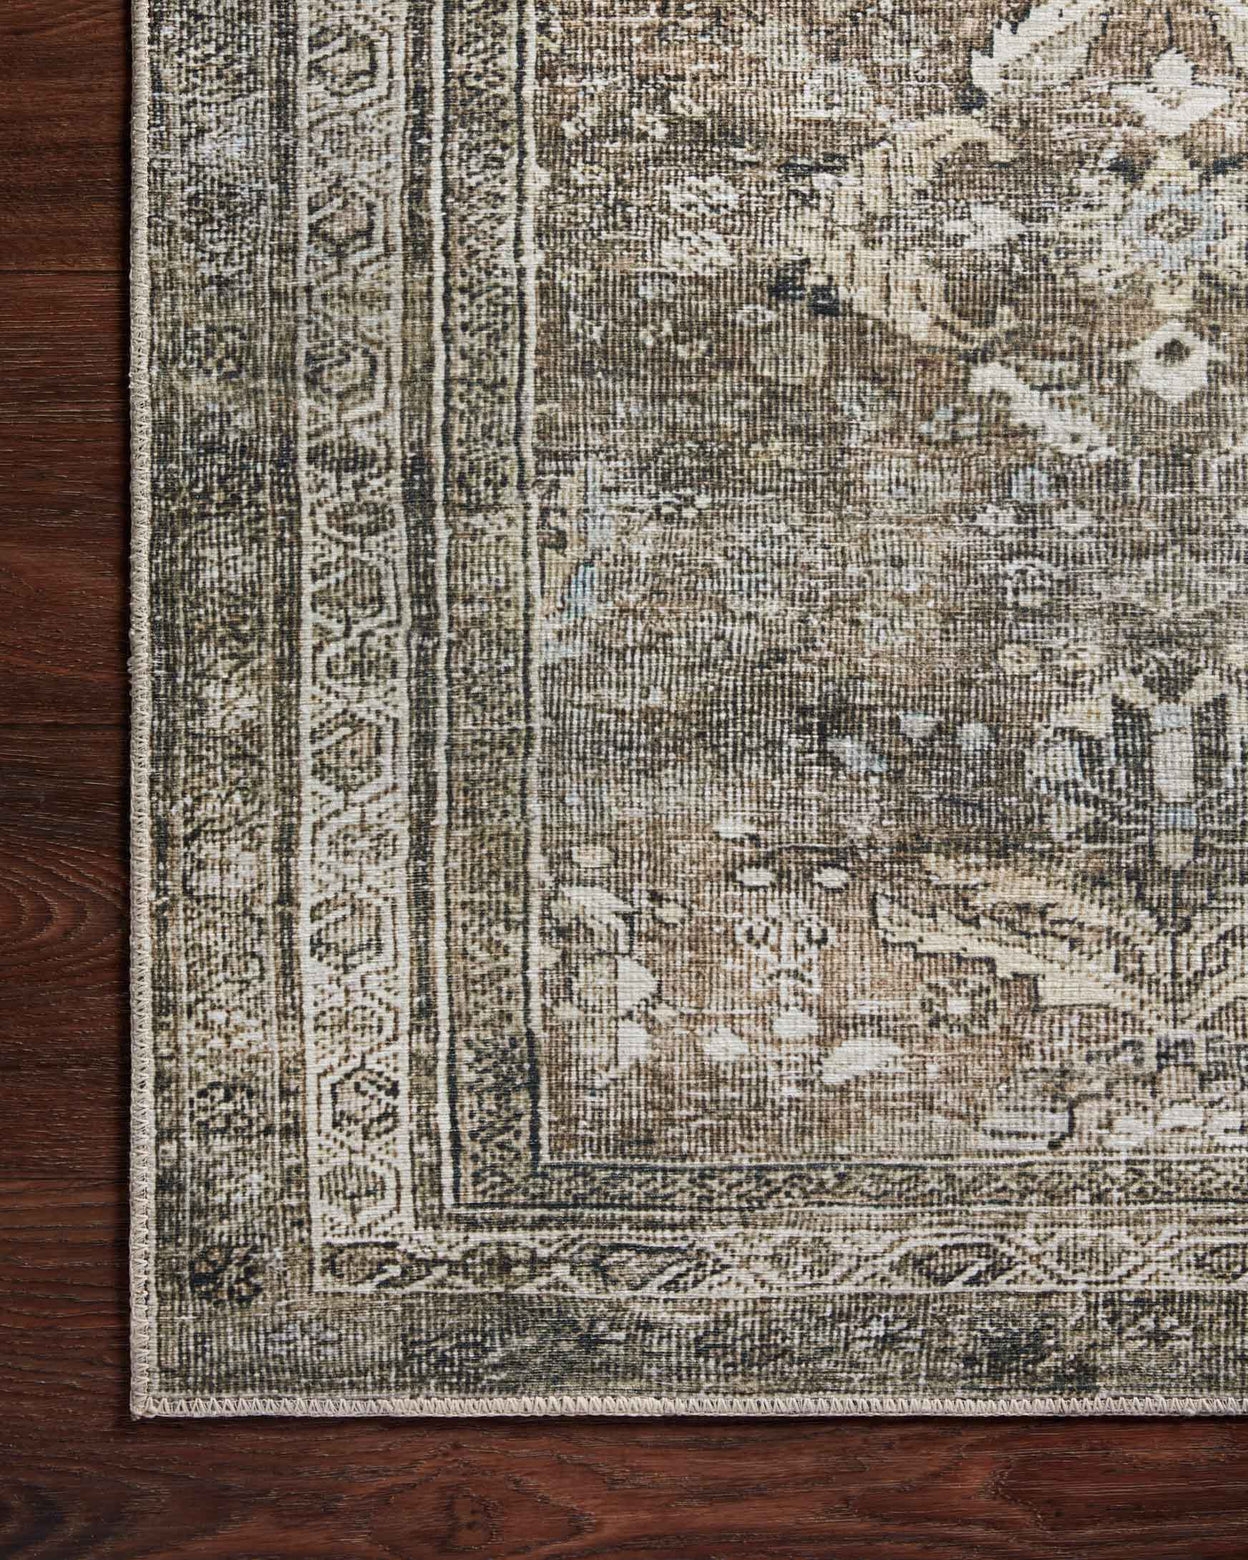 Layla Collection rug - LAY-13 Antique / Moss - Image 7